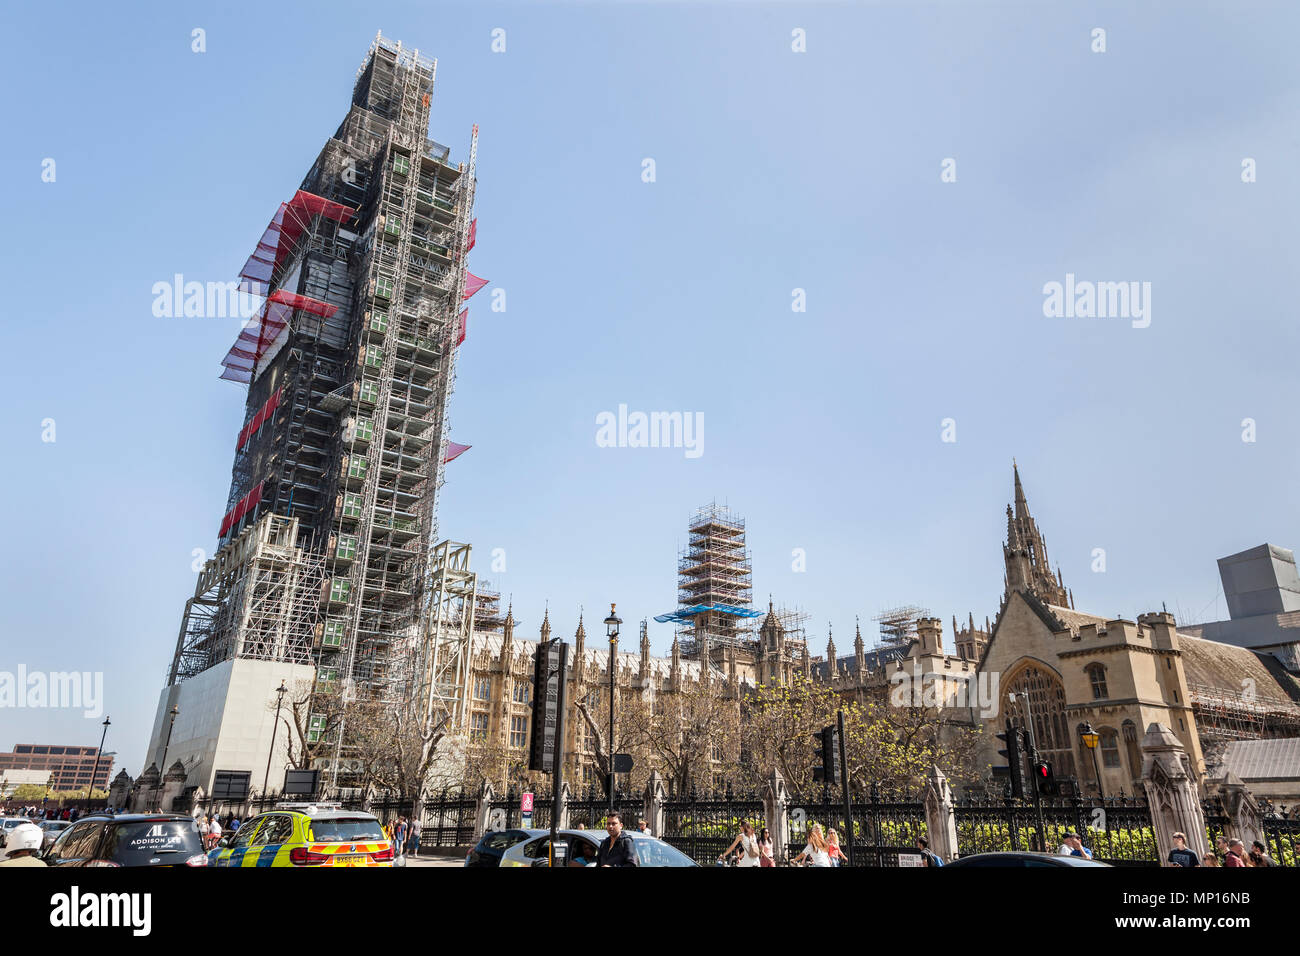 Big Ben and the Houses of Parliament undergo renovation works, London Stock Photo